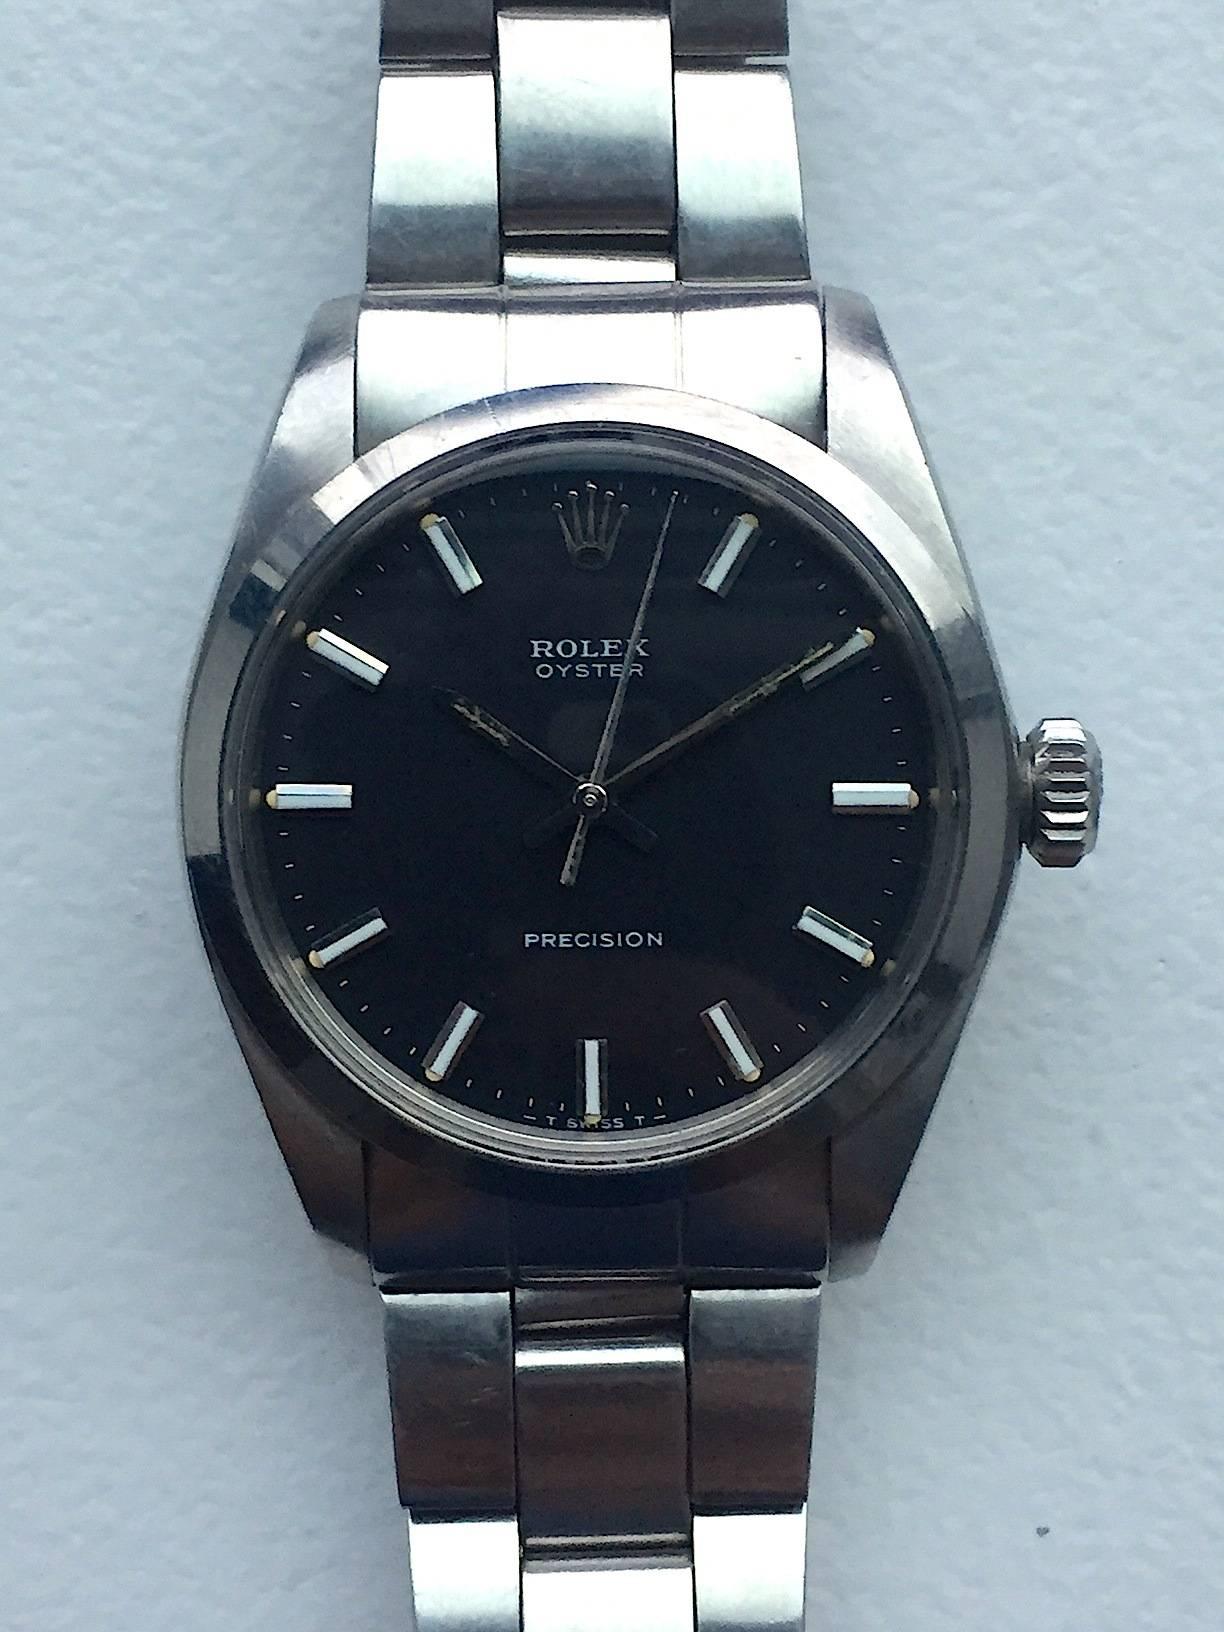 Rolex Stainless Steel Oyster Precison Manual Wind Wristwatch
Rare Black Matte T Swiss T Dial with Applied Hour Markers 
Stainless Steel Smooth Bezel
Stainless Steel Case
34mm in size 
Features Rolex Manual Wind Movement
Acrylic Crystal
From 